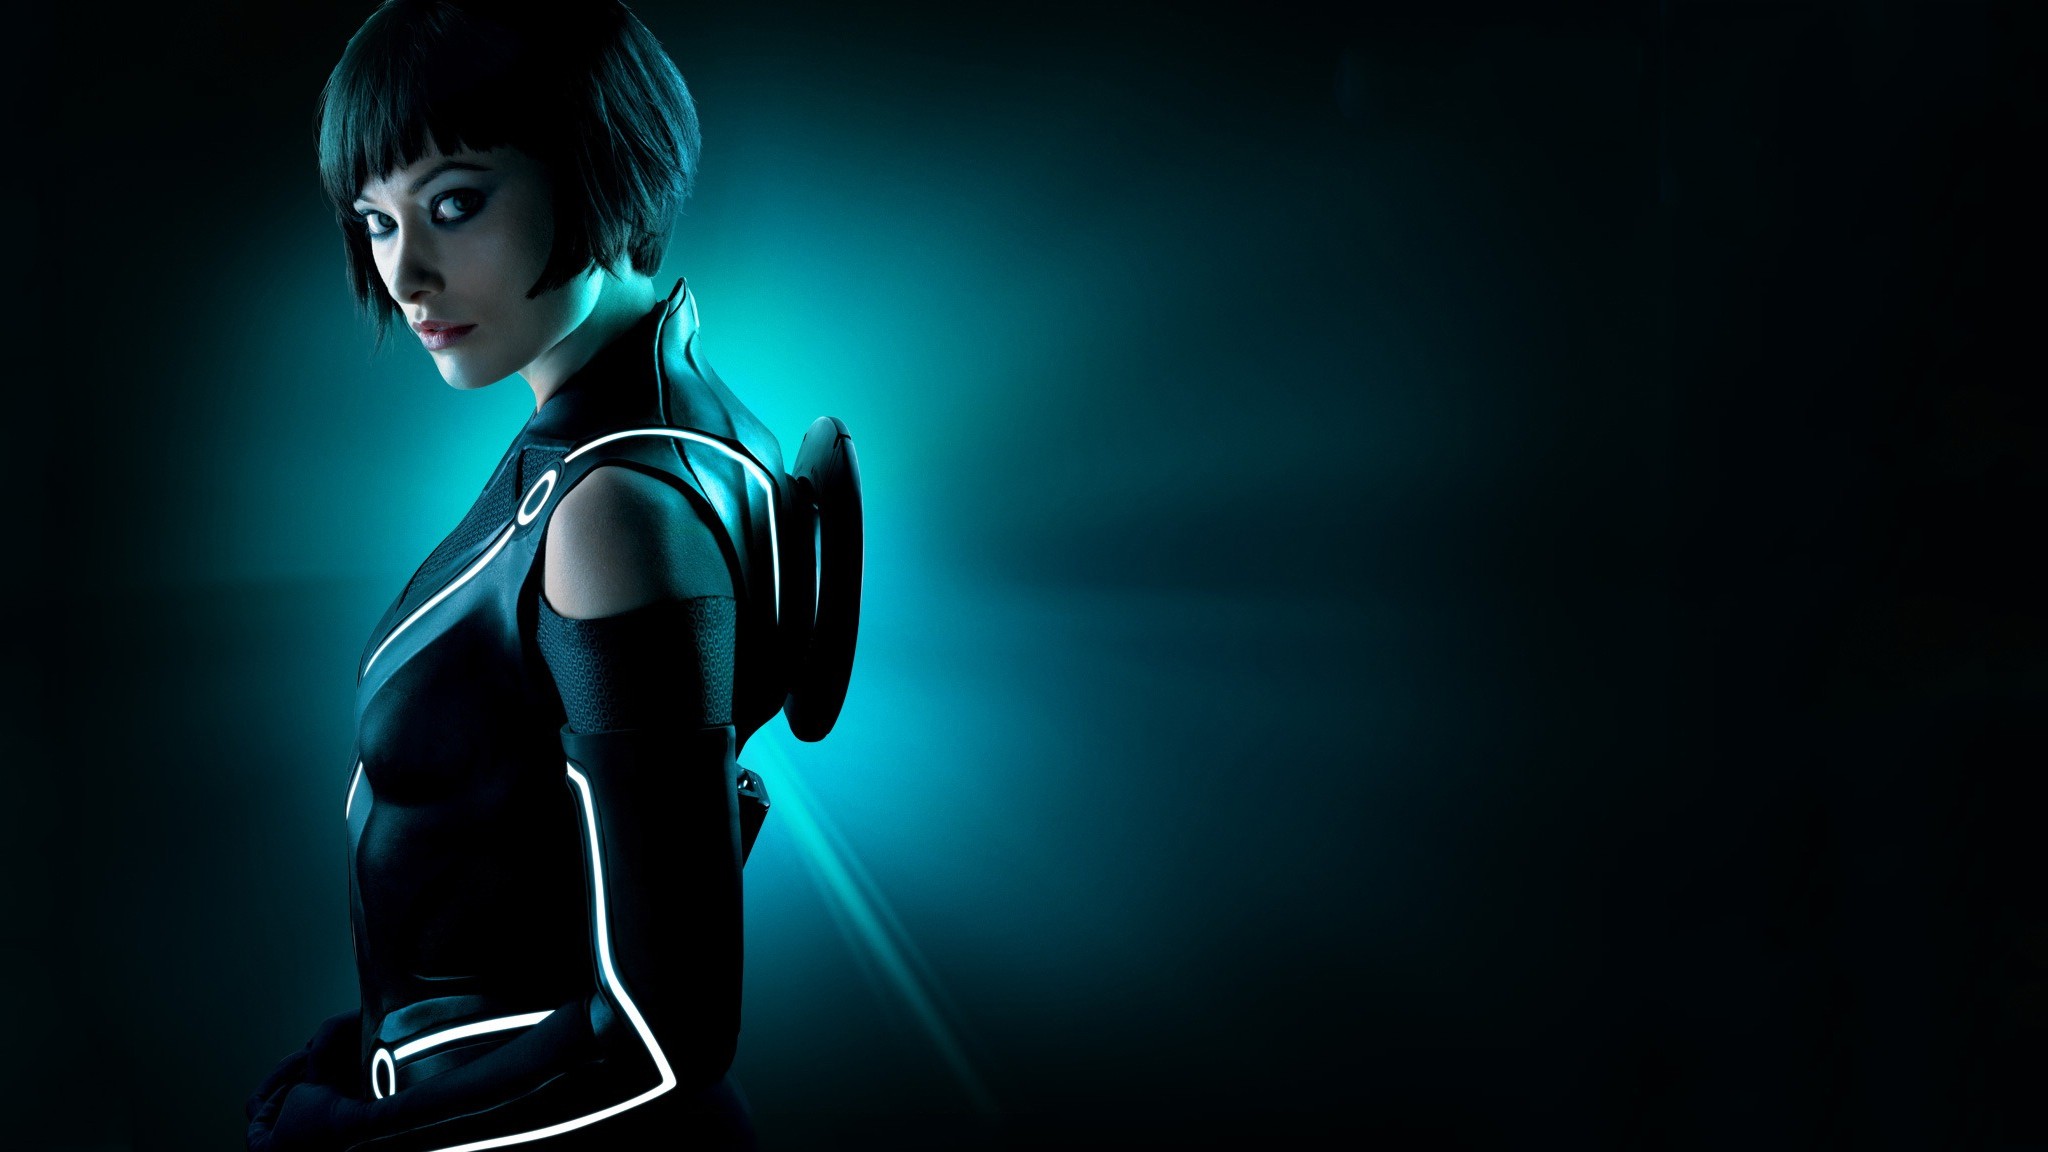 People 2048x1152 Tron: Legacy Olivia Wilde movies movie poster actress women Quorra science fiction women science fiction looking at viewer dark hair makeup Disney cyan American women